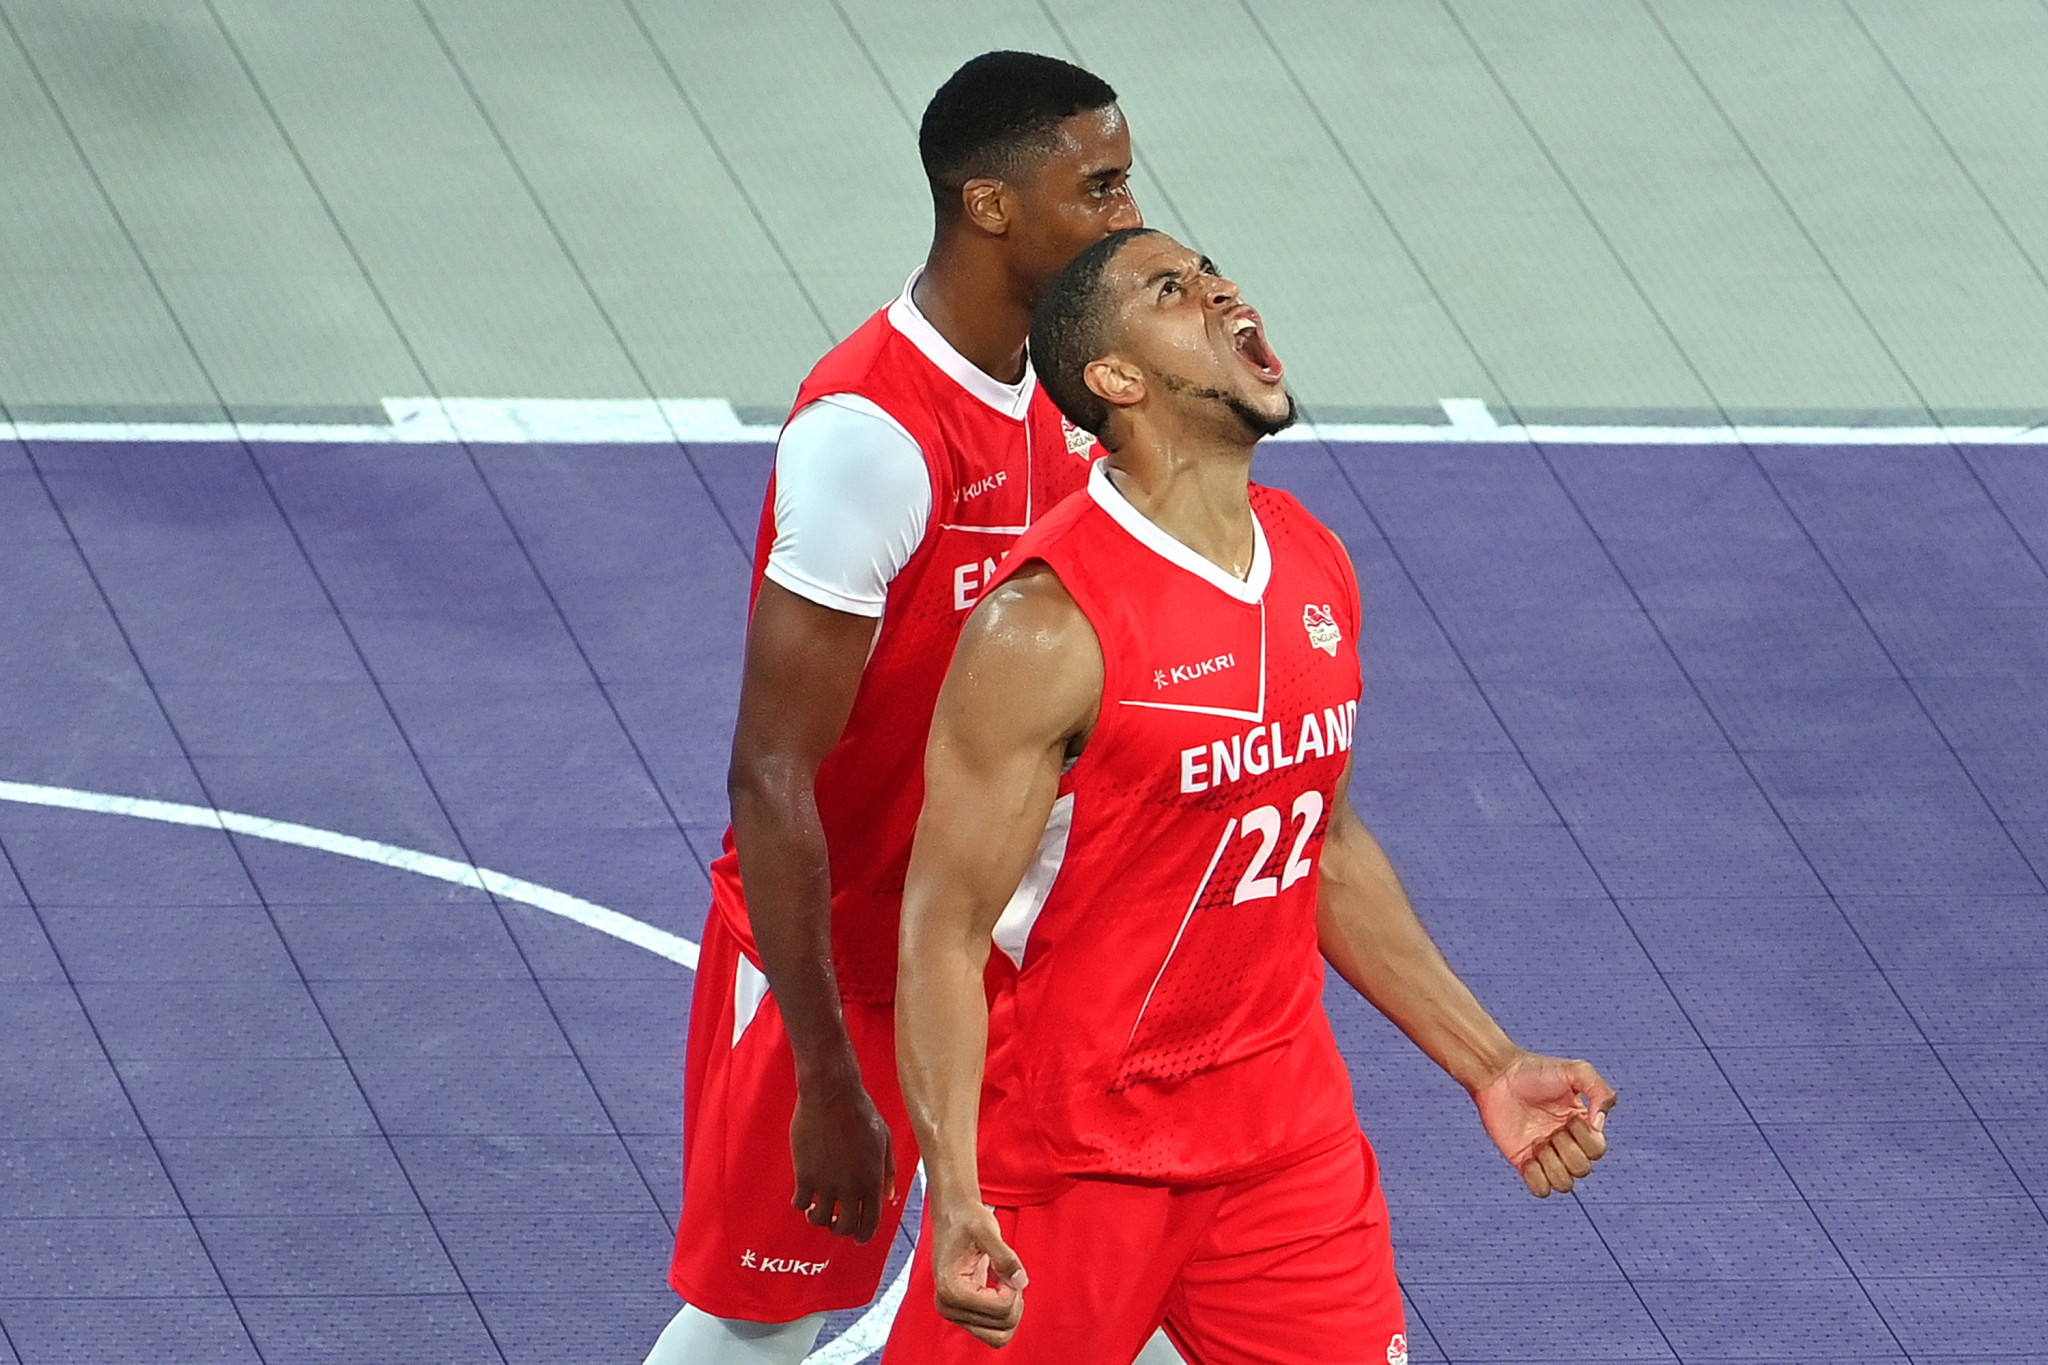 Birmingham-born Myles Hesson secured England's victory in the men's 3x3 basketball final with an overtime buzzer-beater ©Getty Images